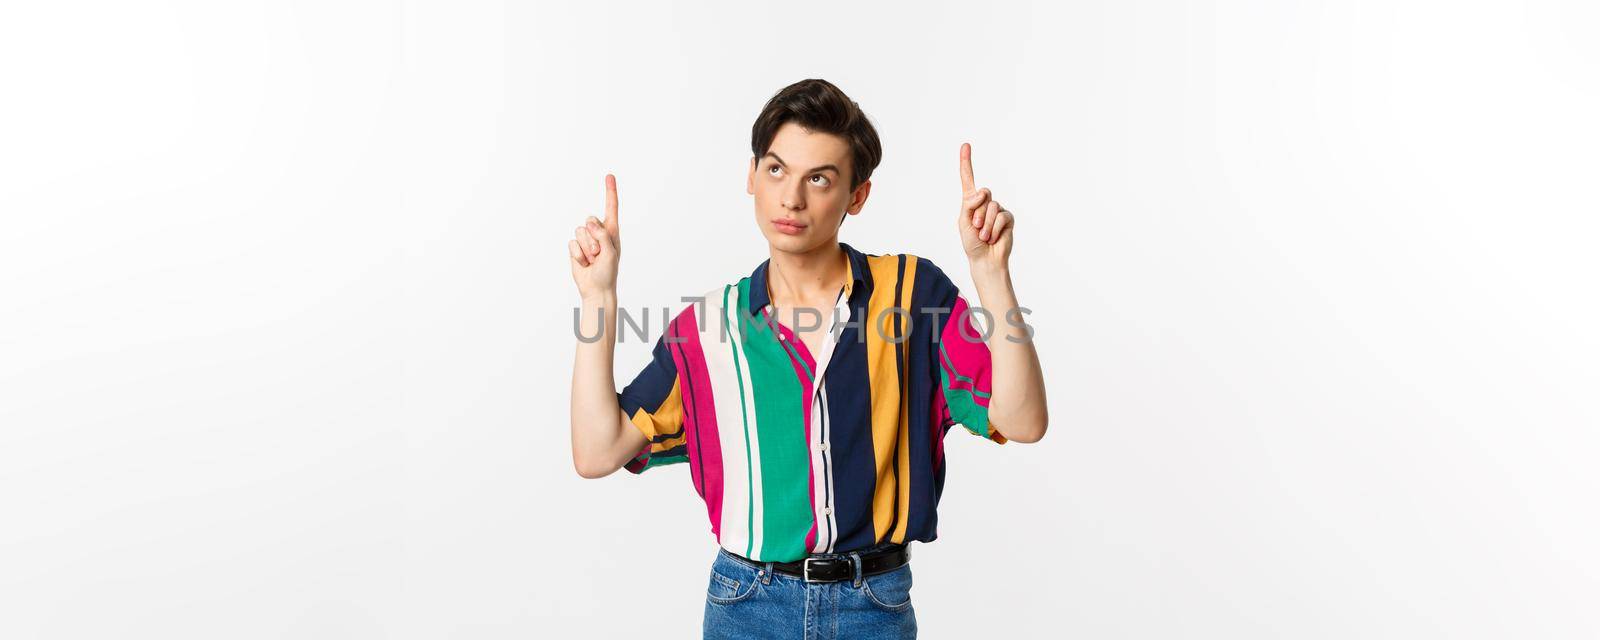 Attractive gay man looking thoughtful, pointing fingers up at logo, standing over white background. Copy space